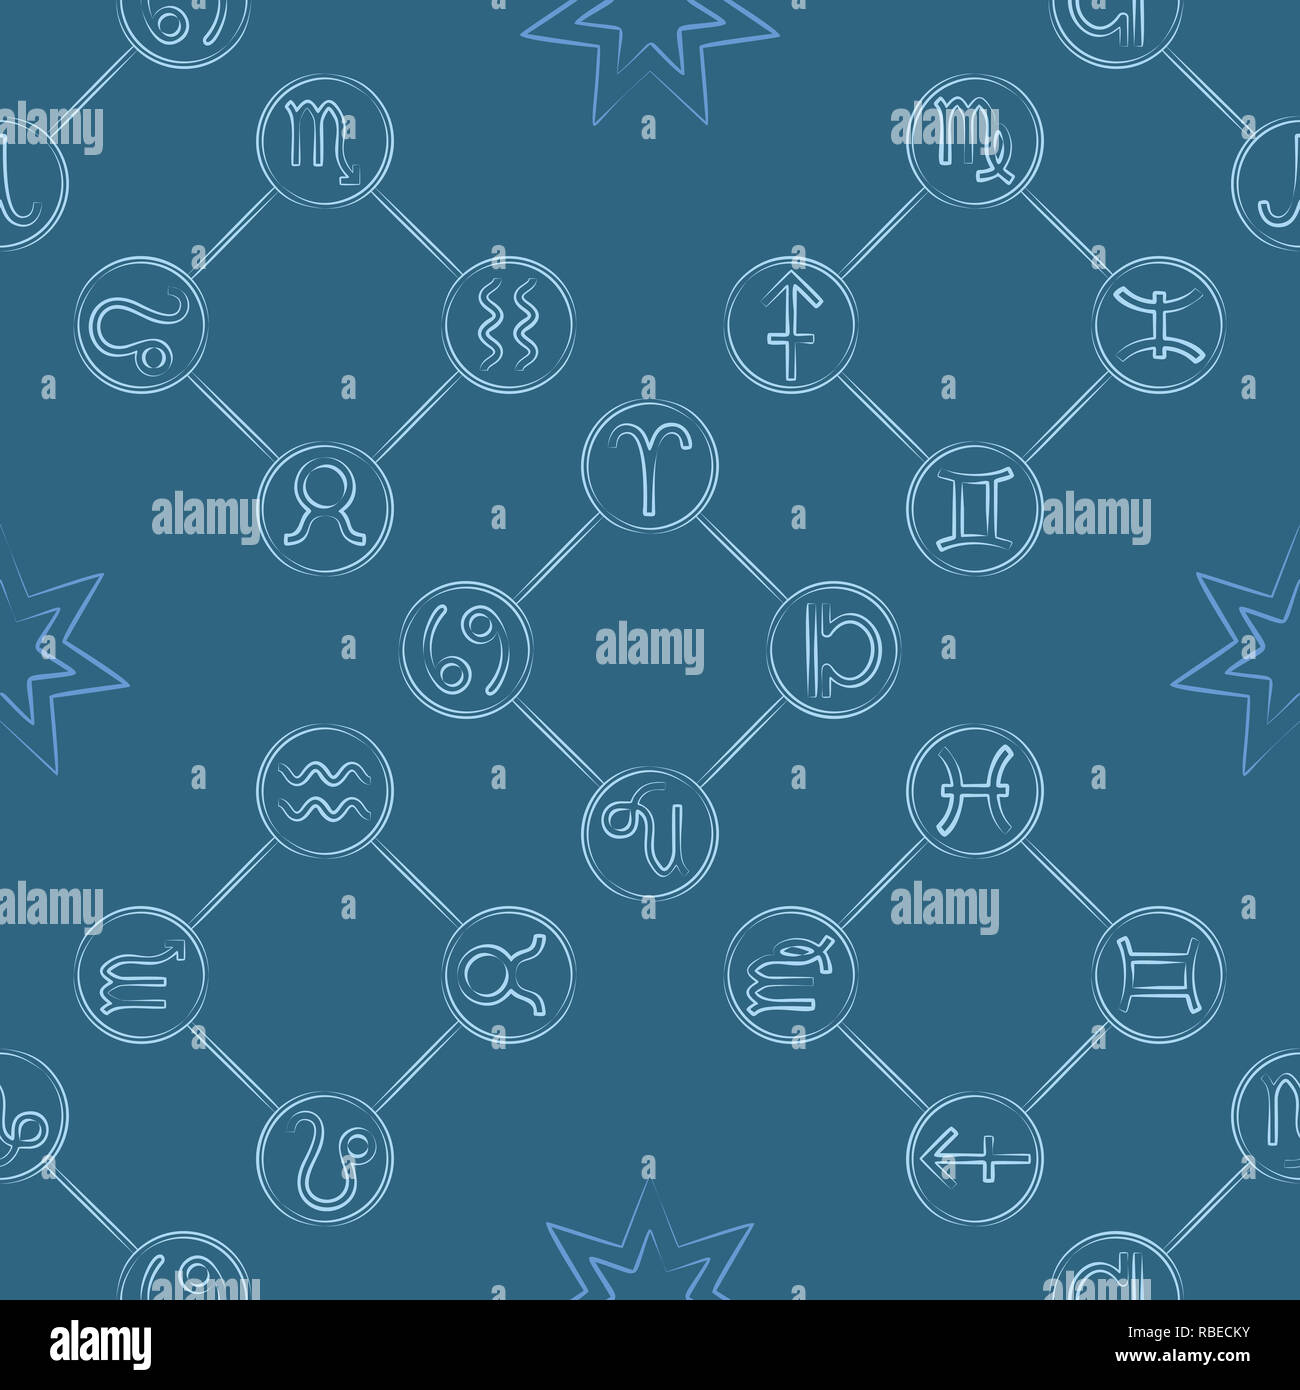 Zodiac signs seamless pattern with stars and division - quadruplicity (quality - cardinal, fixed, mutable) Stock Photo